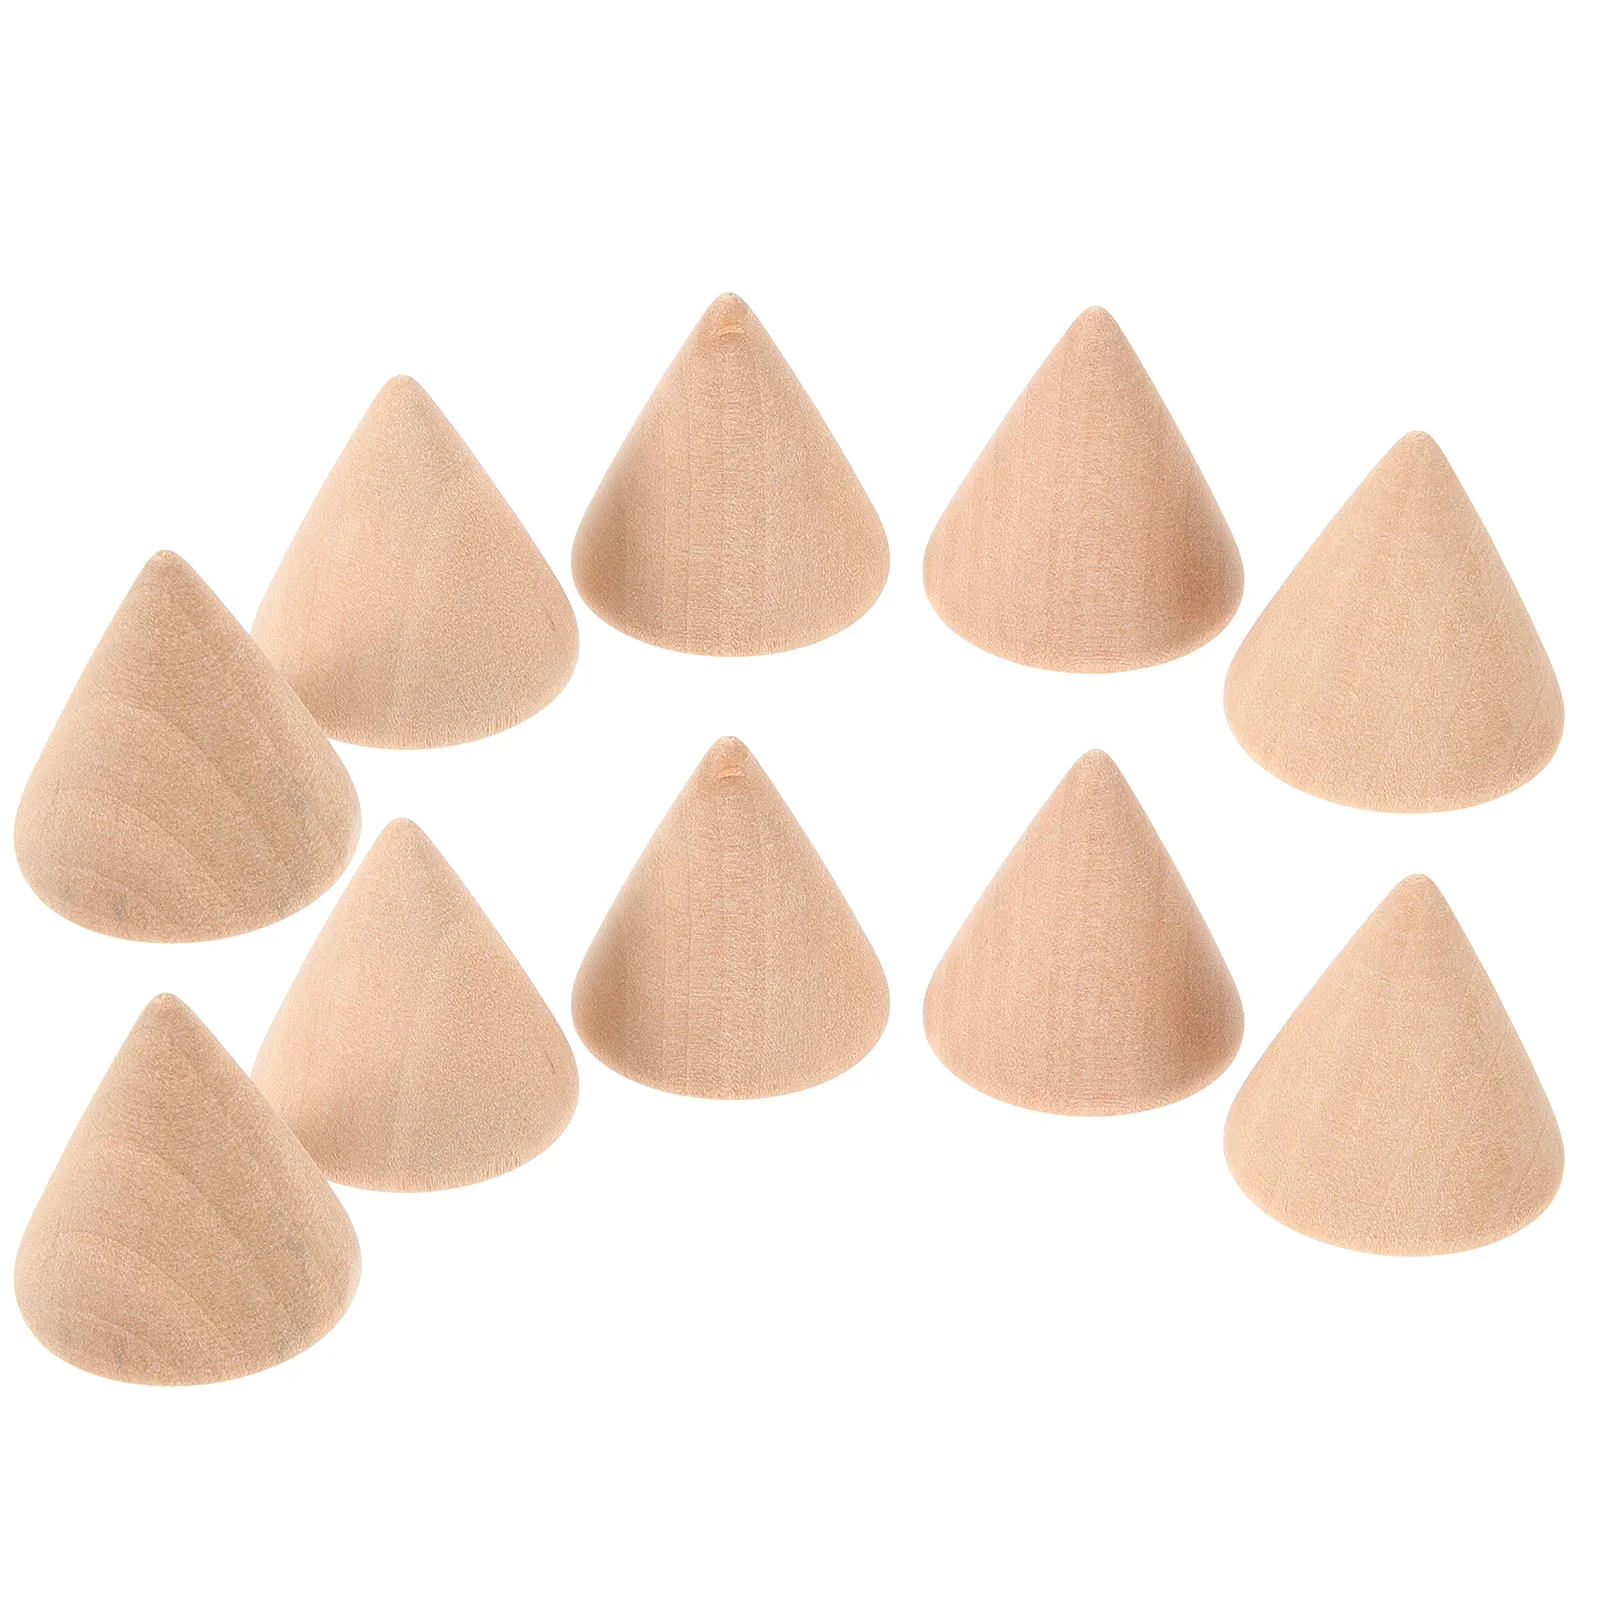 

10pcs 31cm Unpainted Wood Cones Ring Holder Ring Display Stands Organizer Holders Jewelry Display Stand DIY Craft Wooden Cone